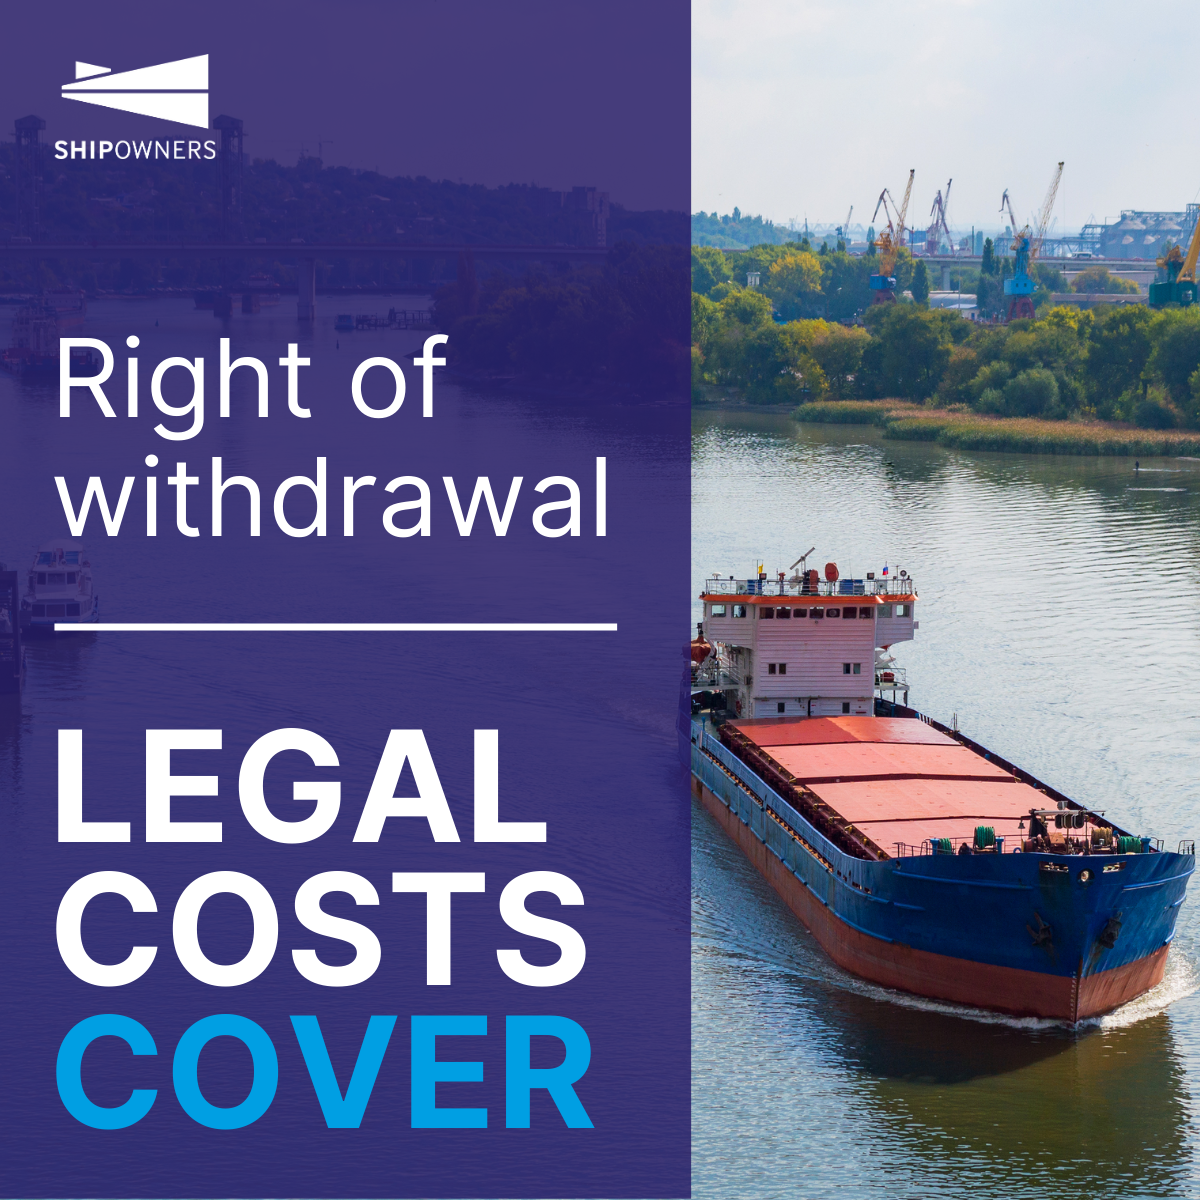 LEGAL COSTS COVER withdrawal (6).png